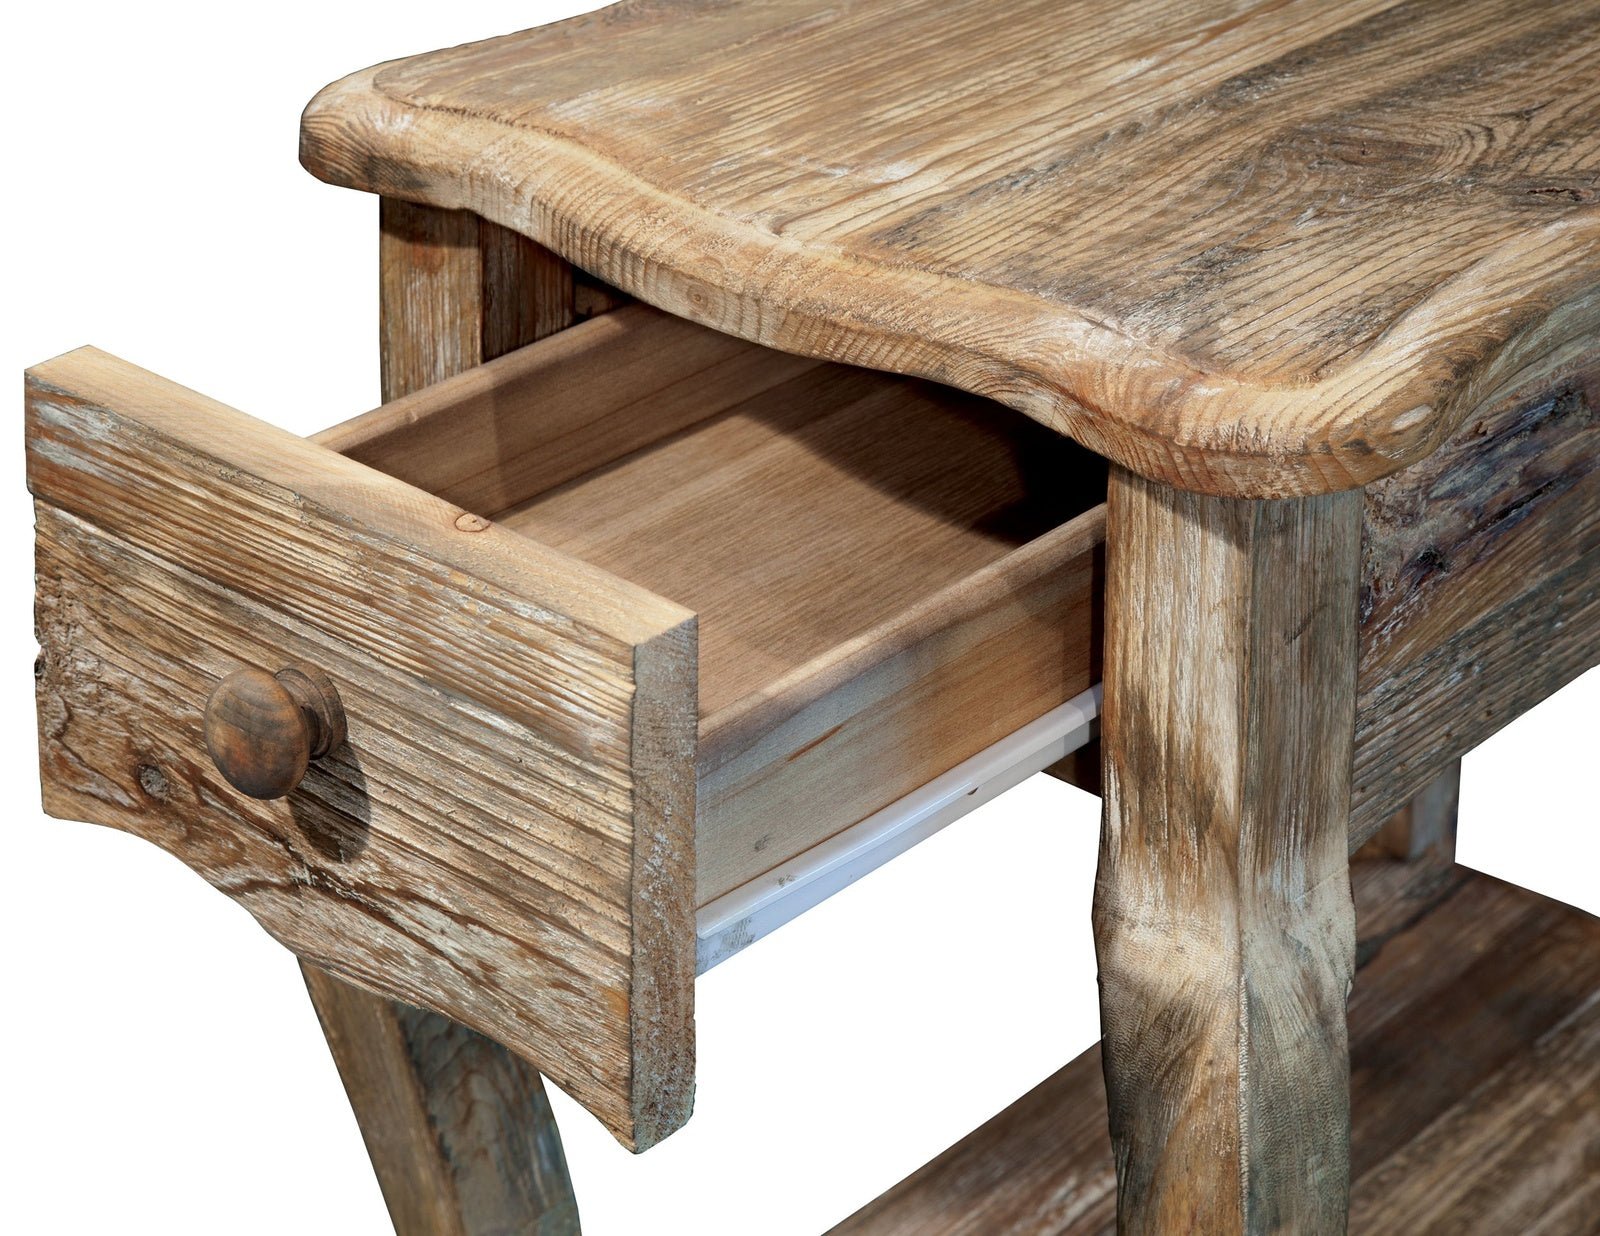 Rustic - Reclaimed Chairside Table, Driftwood - End Tables